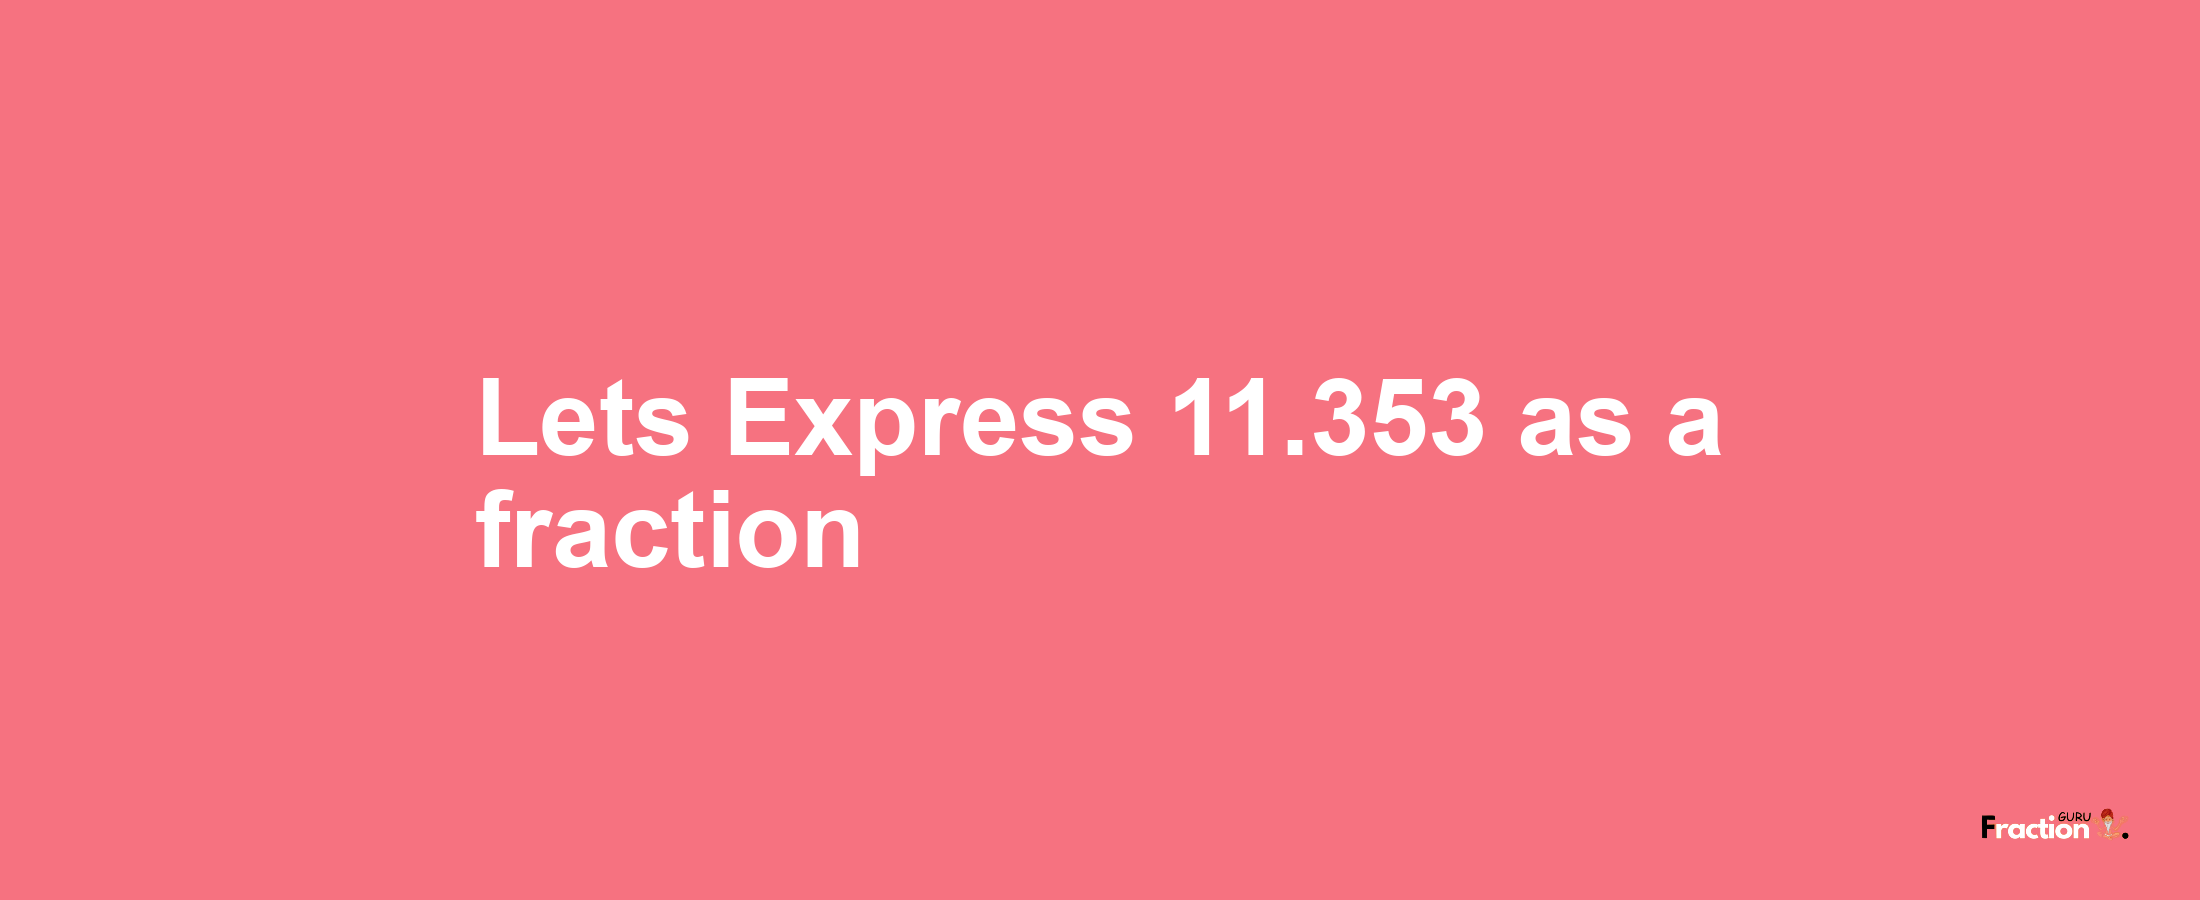 Lets Express 11.353 as afraction